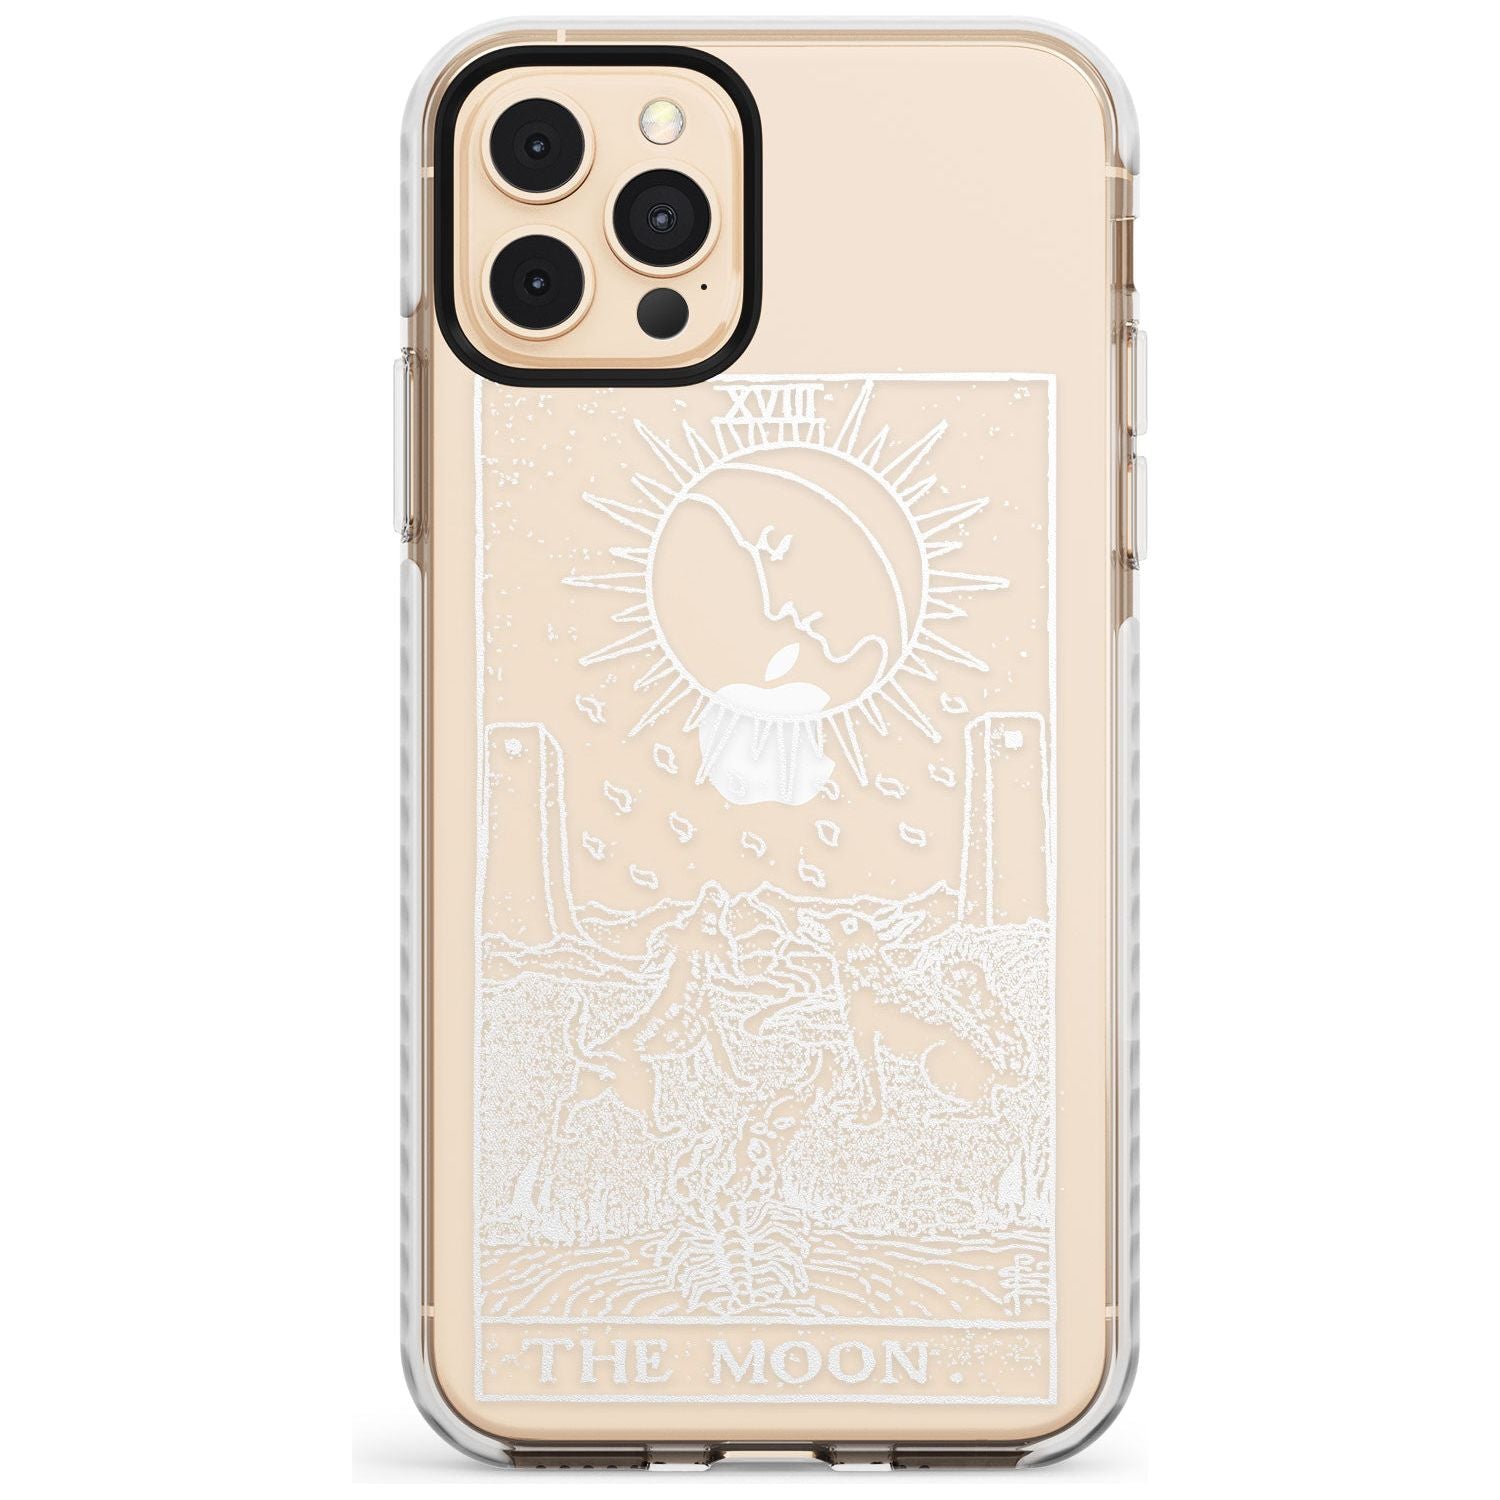 The Moon Tarot Card - White Transparent Slim TPU Phone Case for iPhone 11 Pro Max